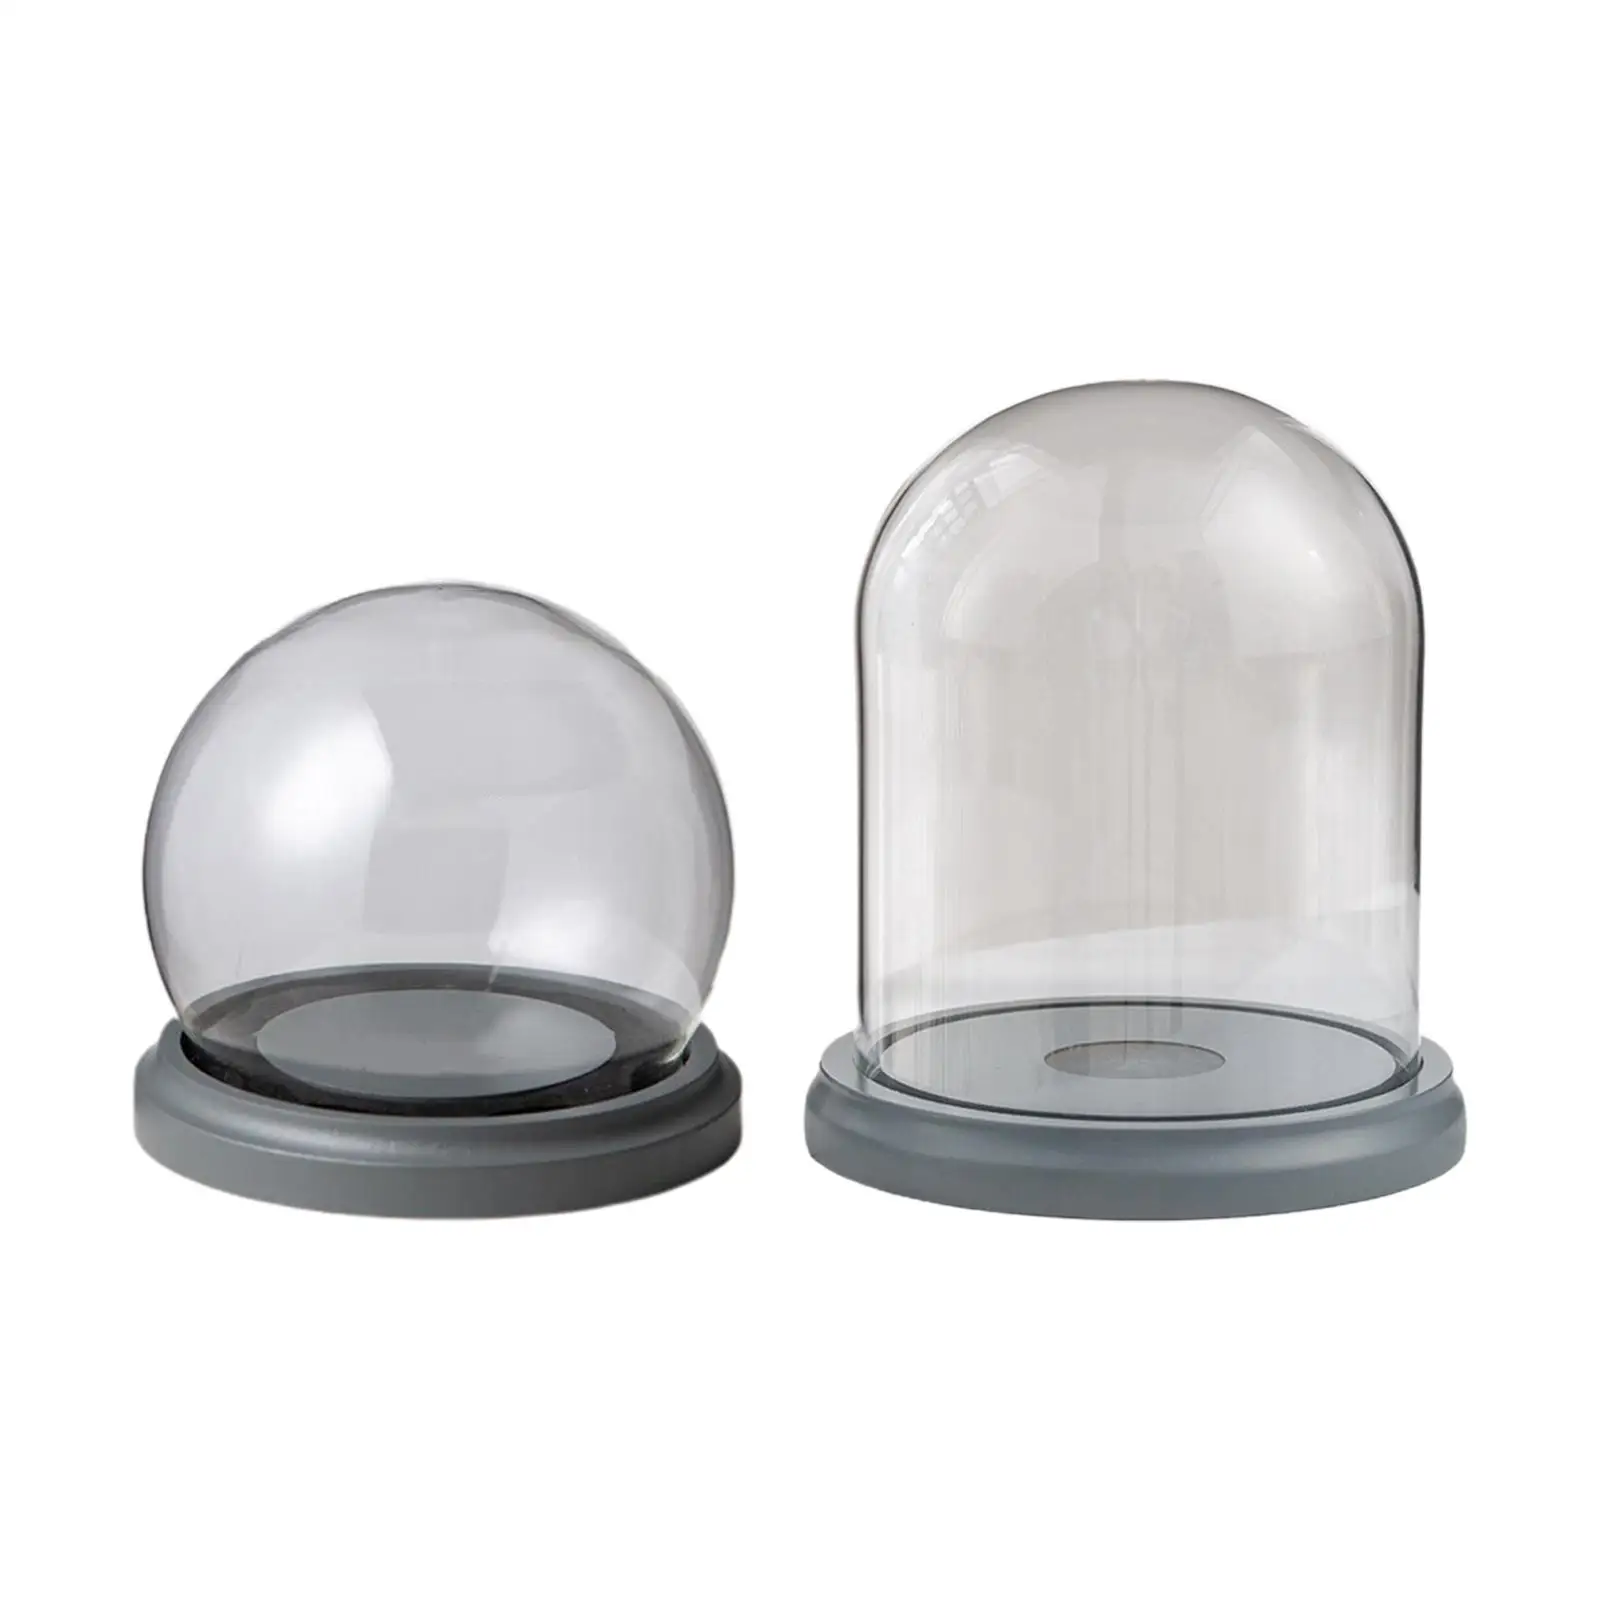 Decorative Clear Collectibles with Rustic Base for Birthday Gifts Office